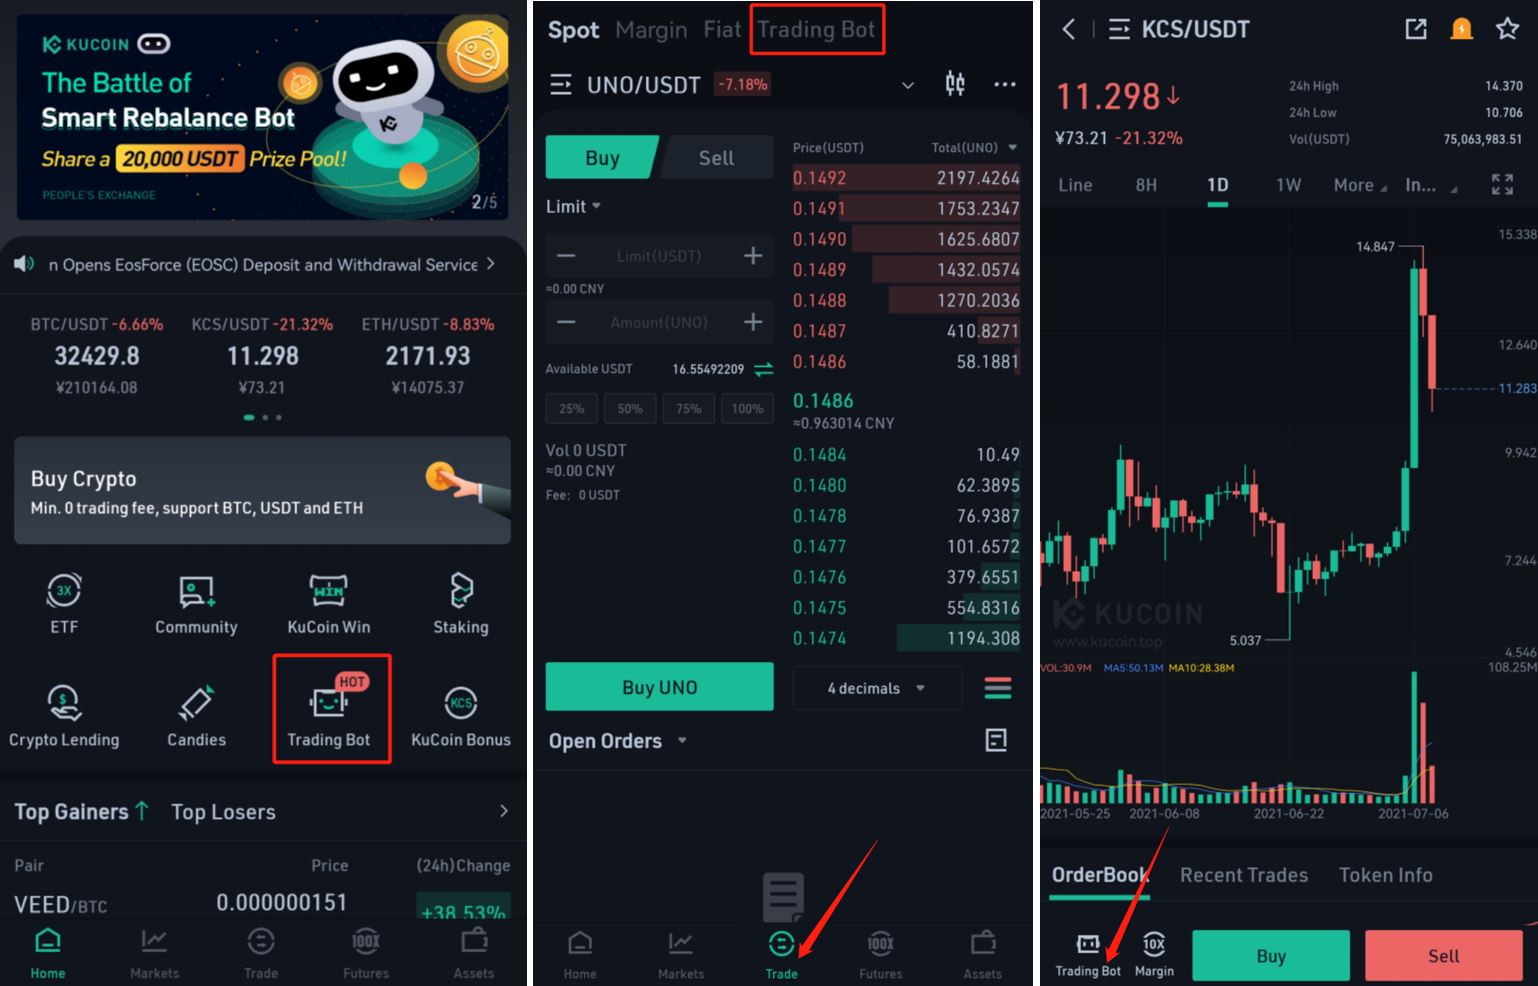 Can You Profit from Using a Crypto Trading Bot? – Opportunity